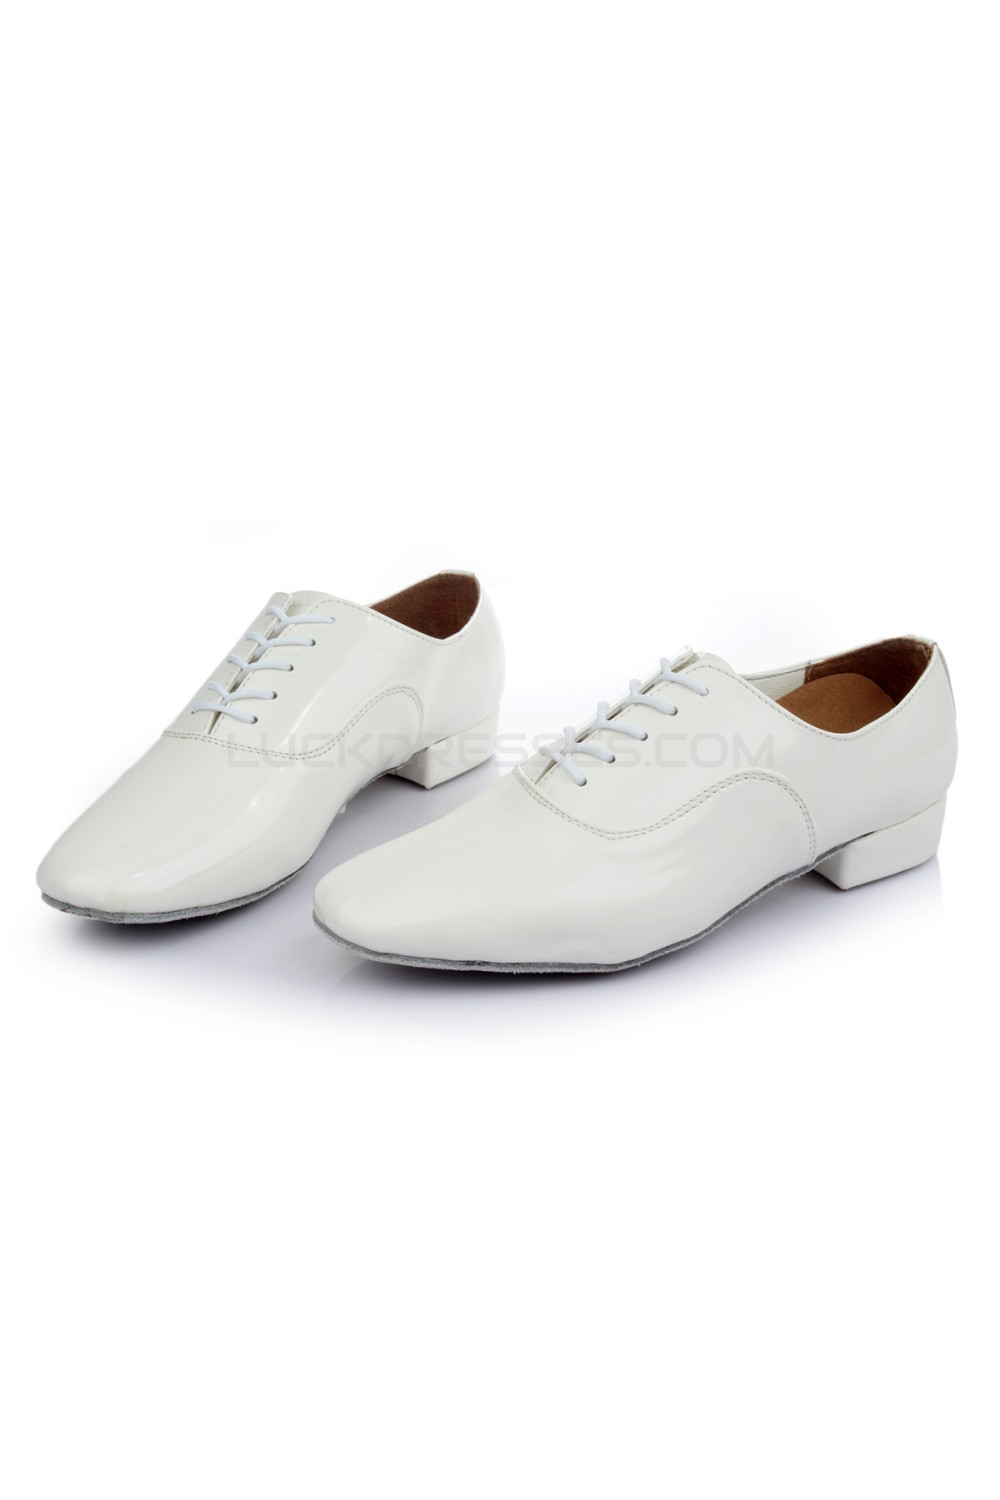 white shoes for dance